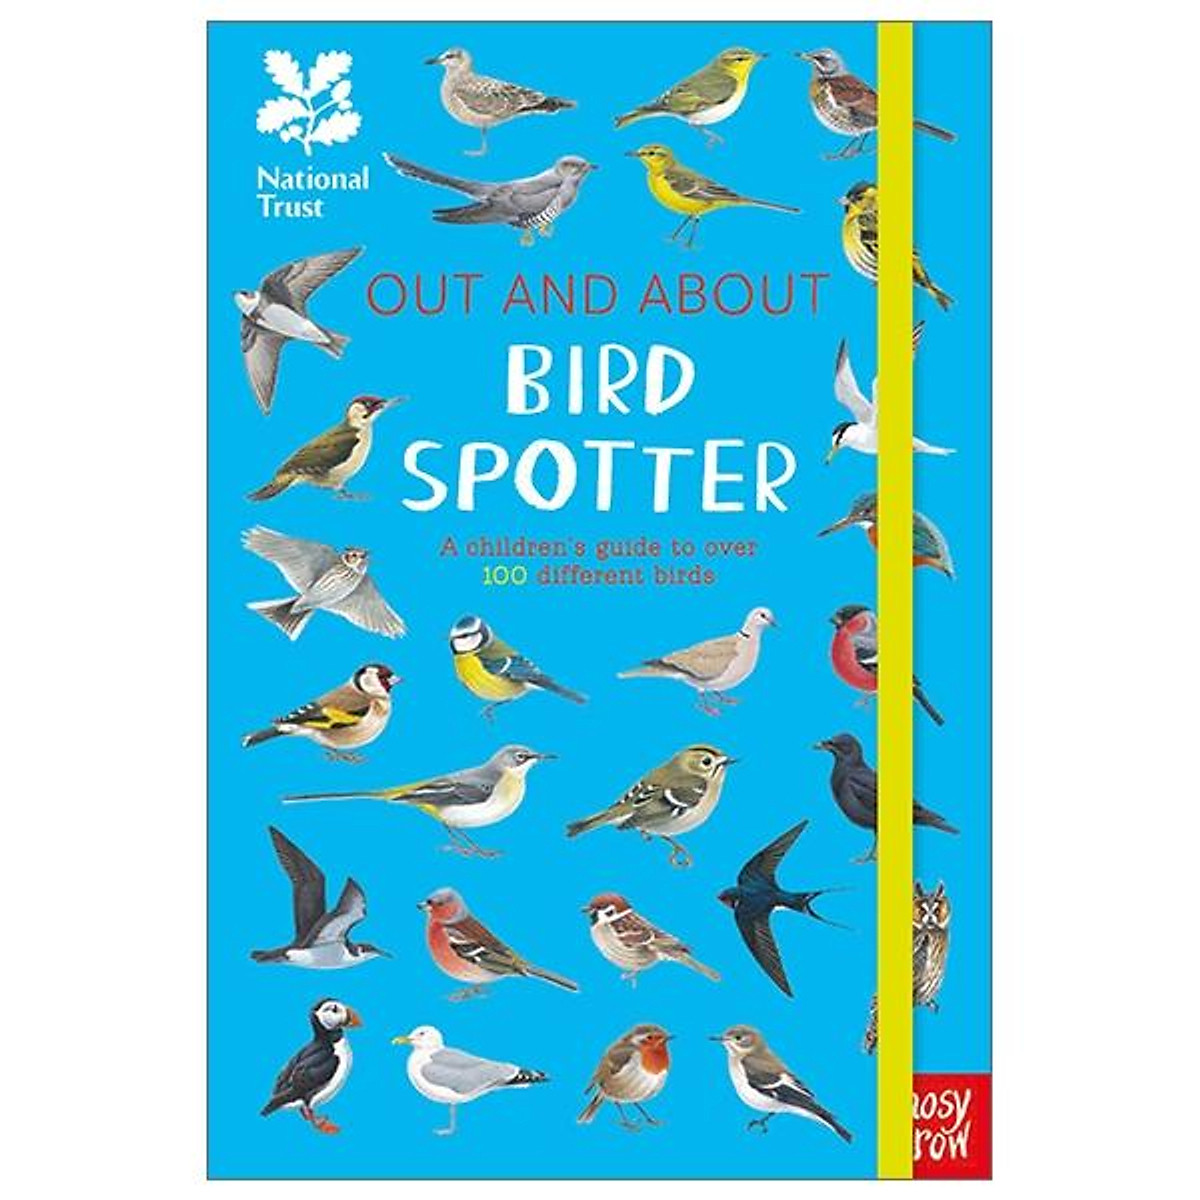 National Trust: Out and About Bird Spotter